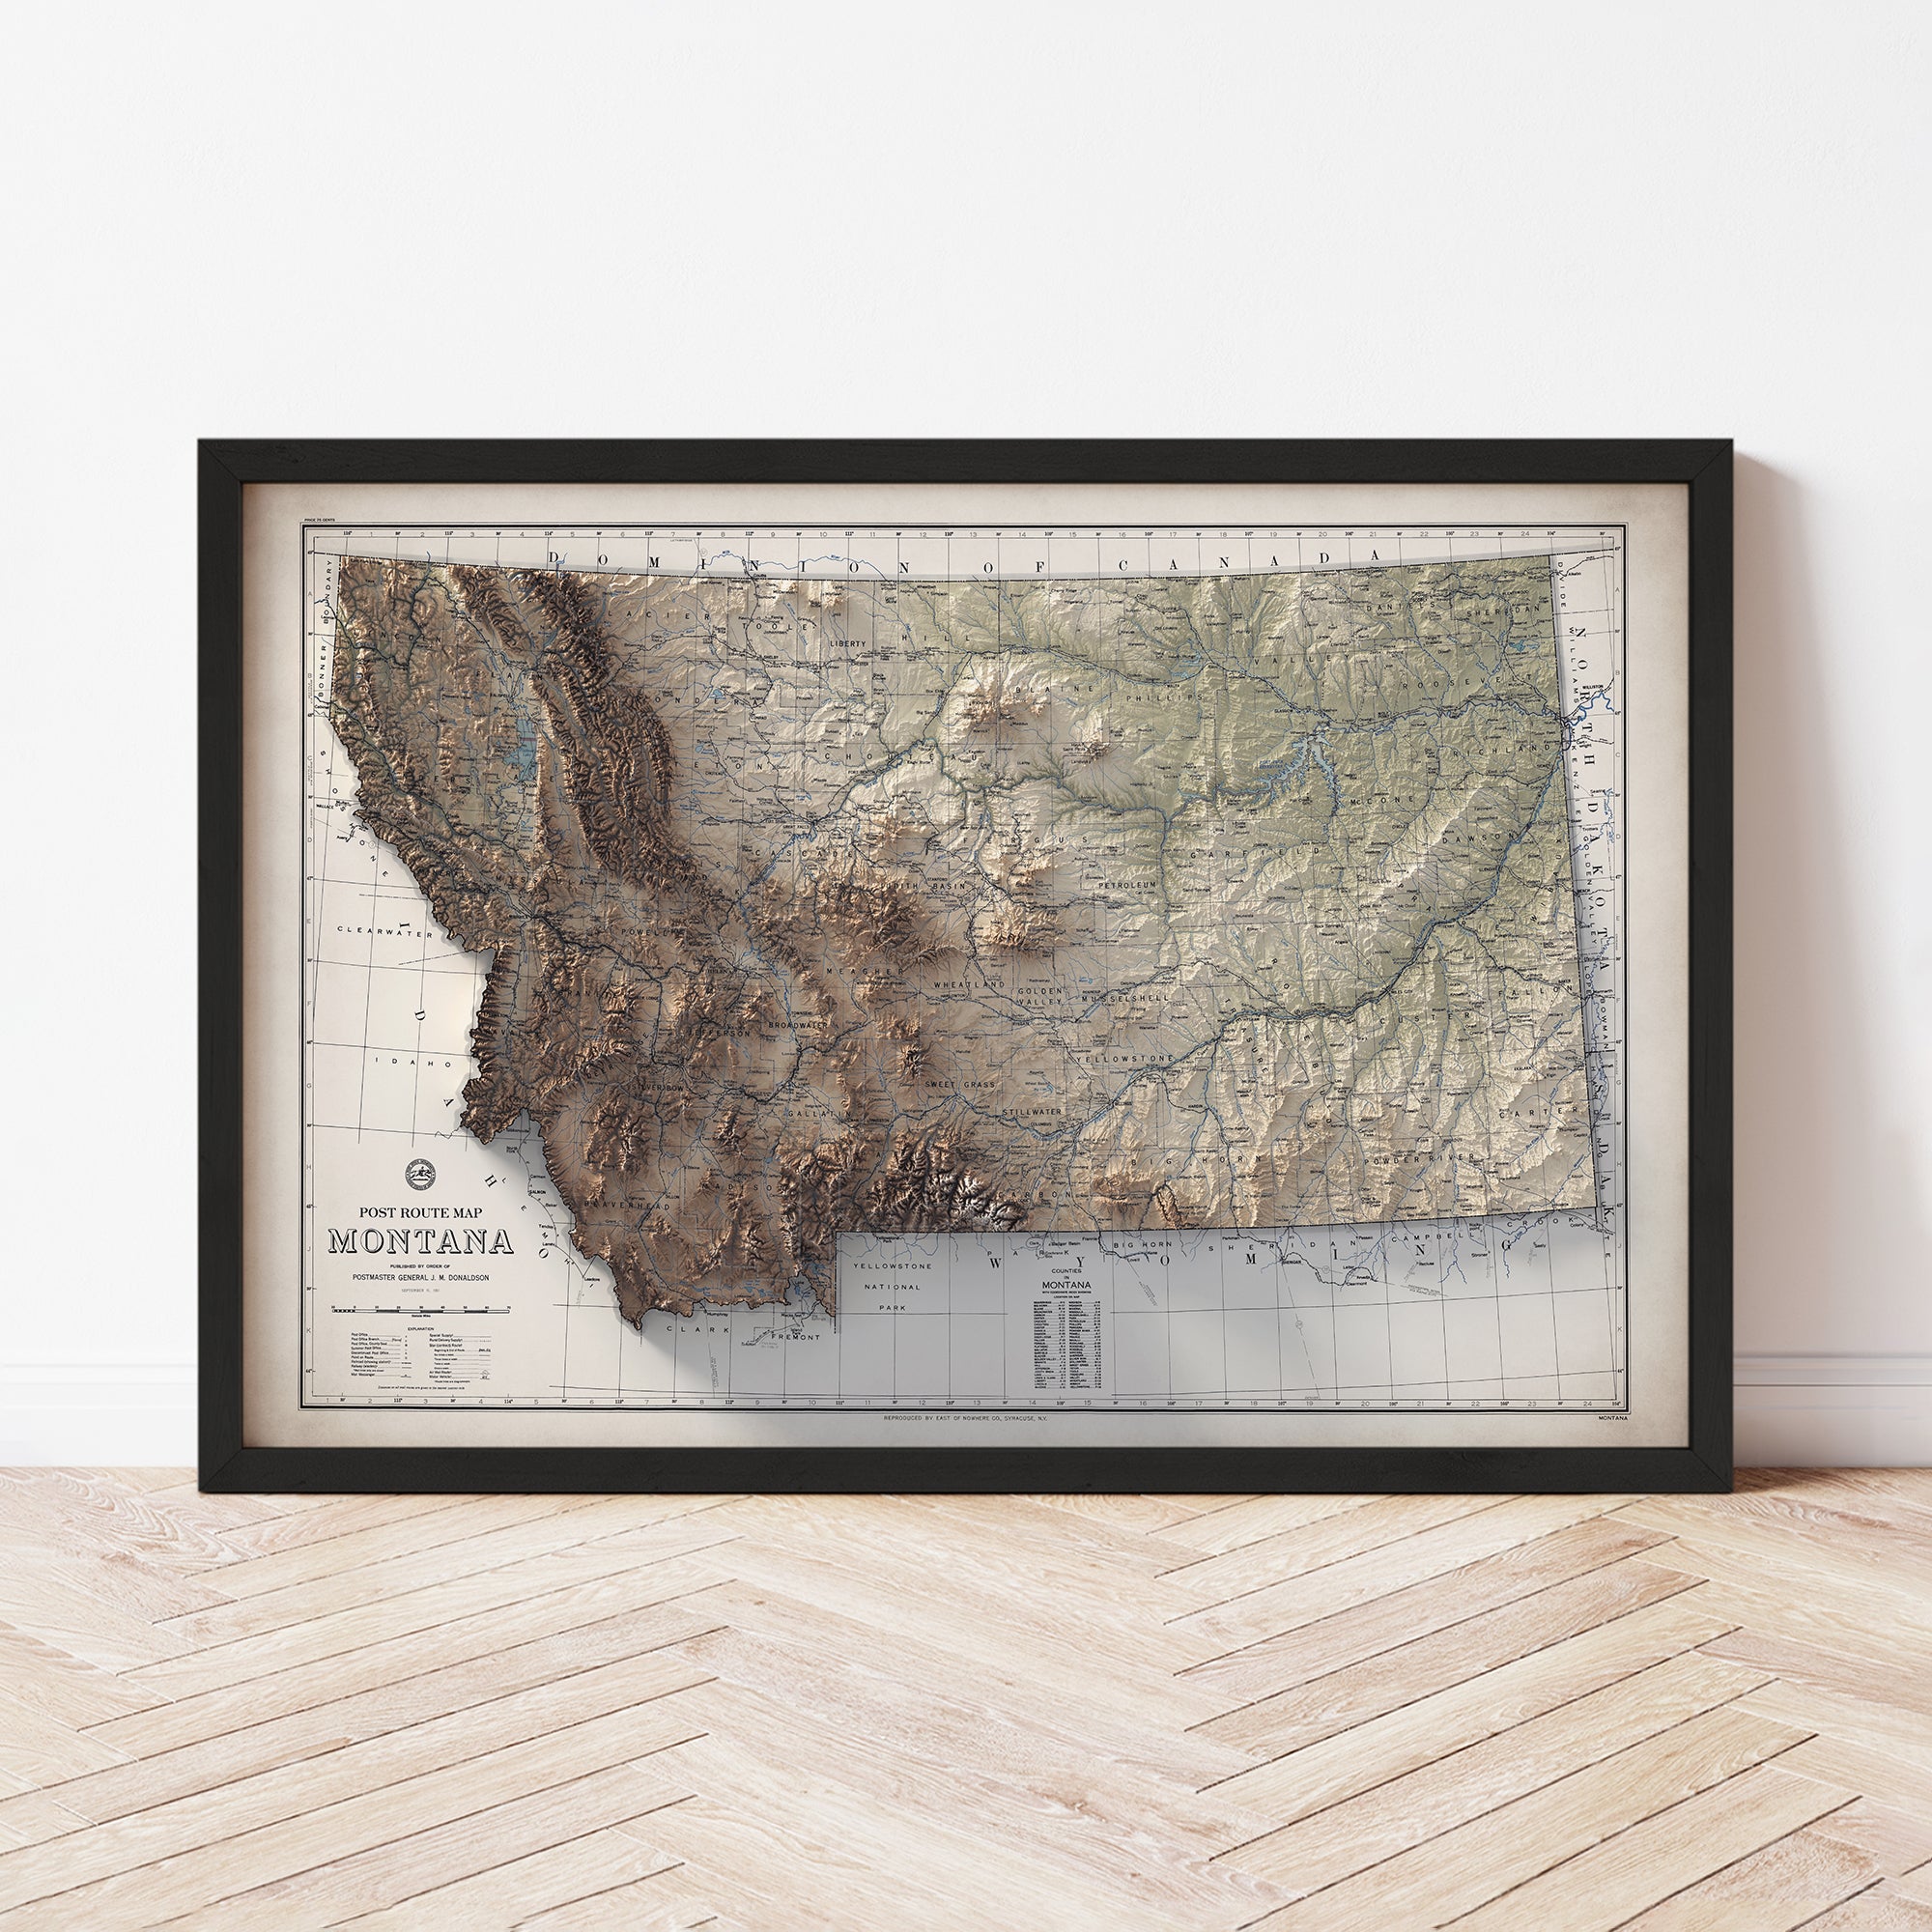 Montana - Vintage Shaded Relief Map (1951)